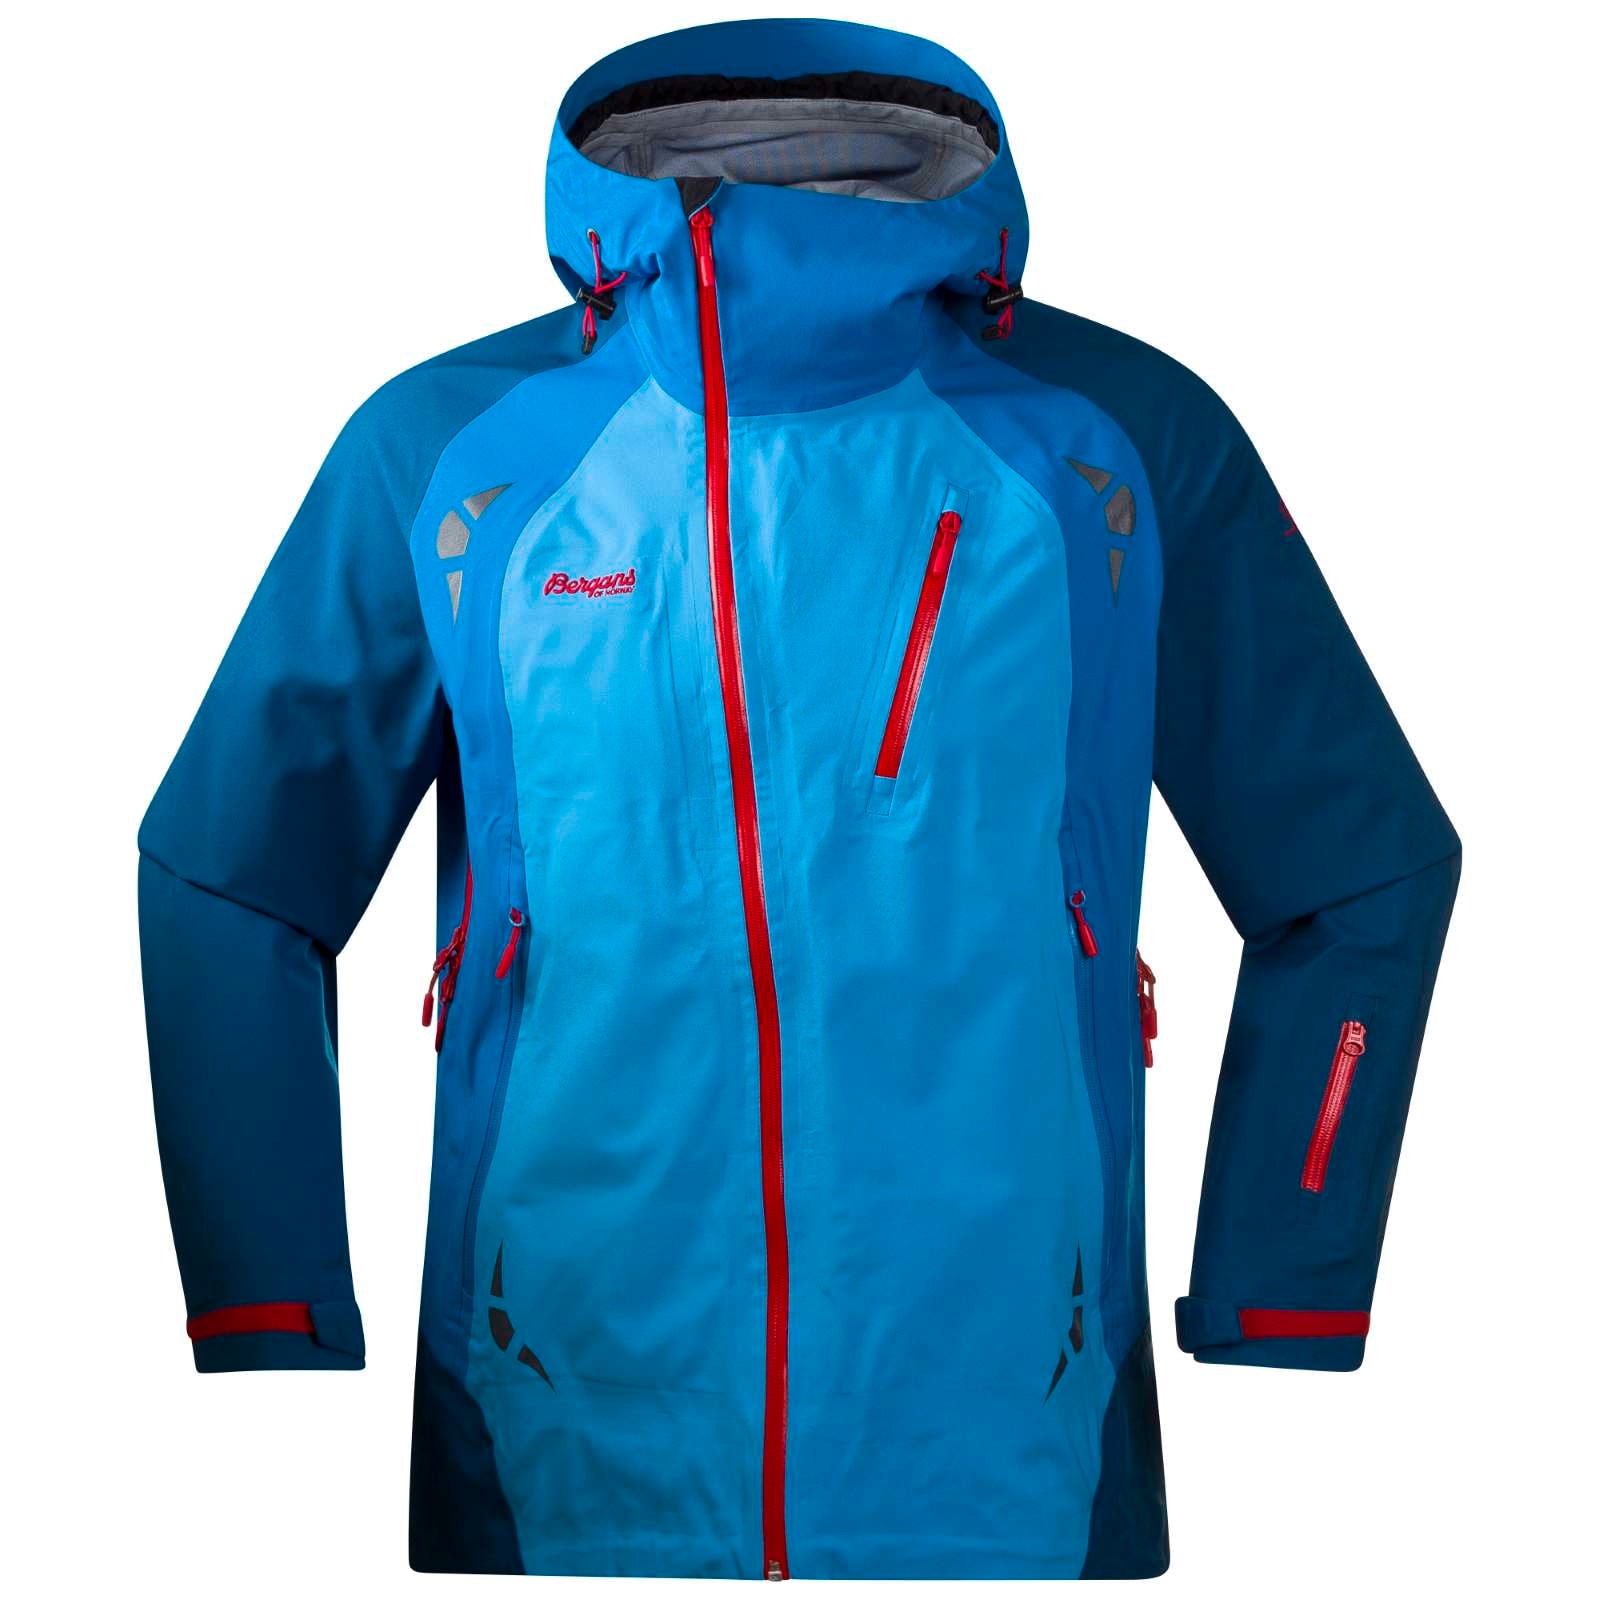 Bergans Isogaisa Jacket from Outnorth